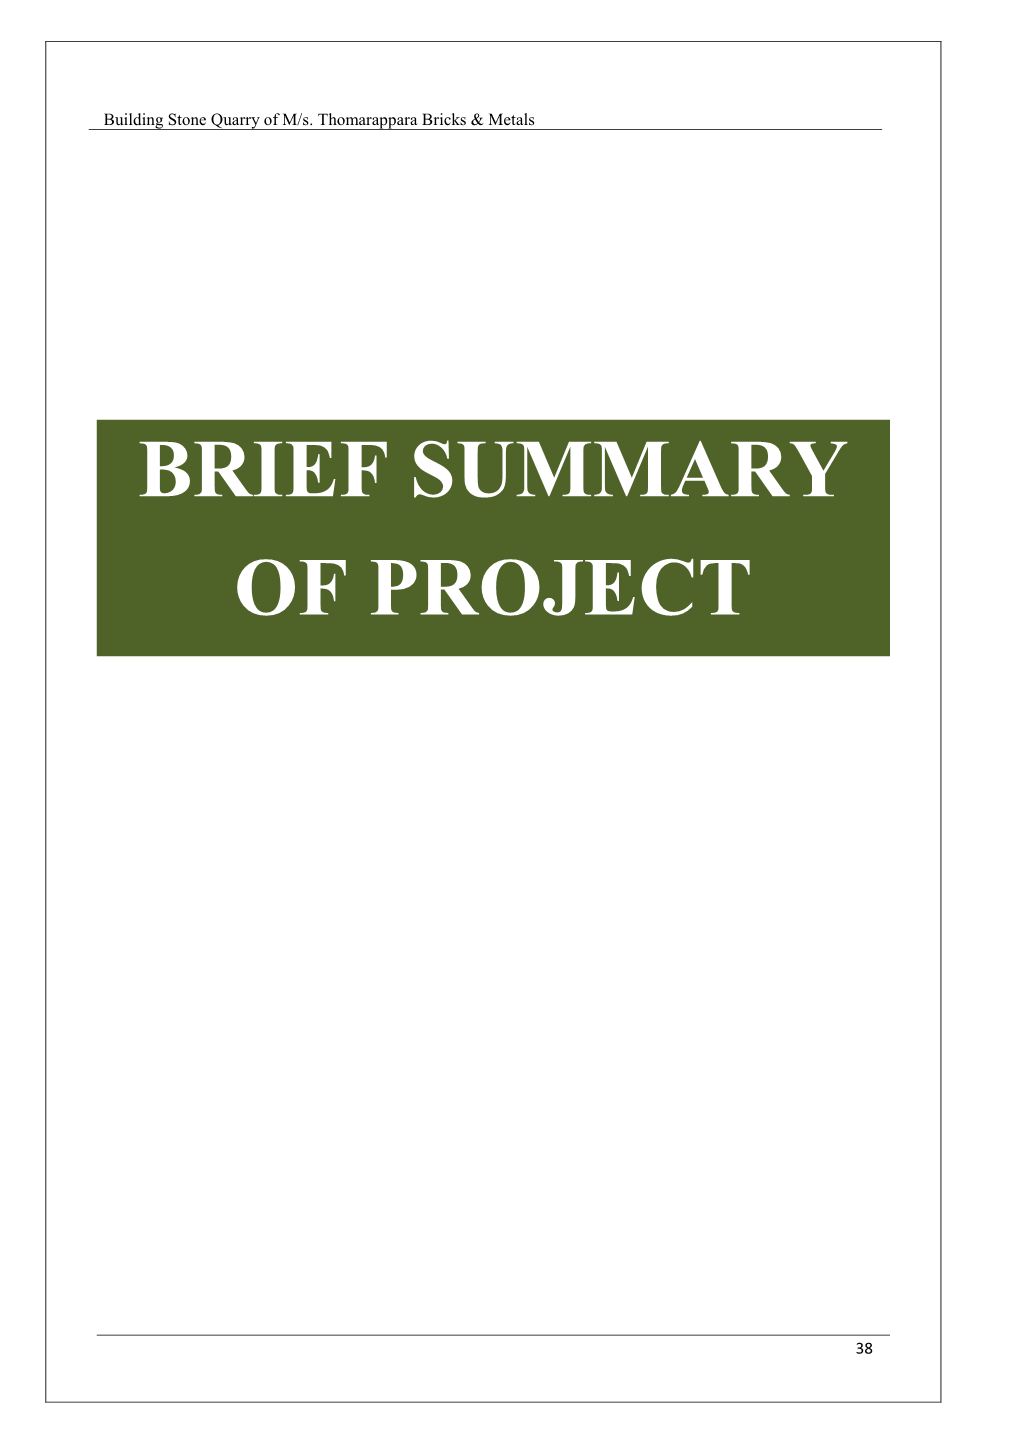 Brief Summary of Project